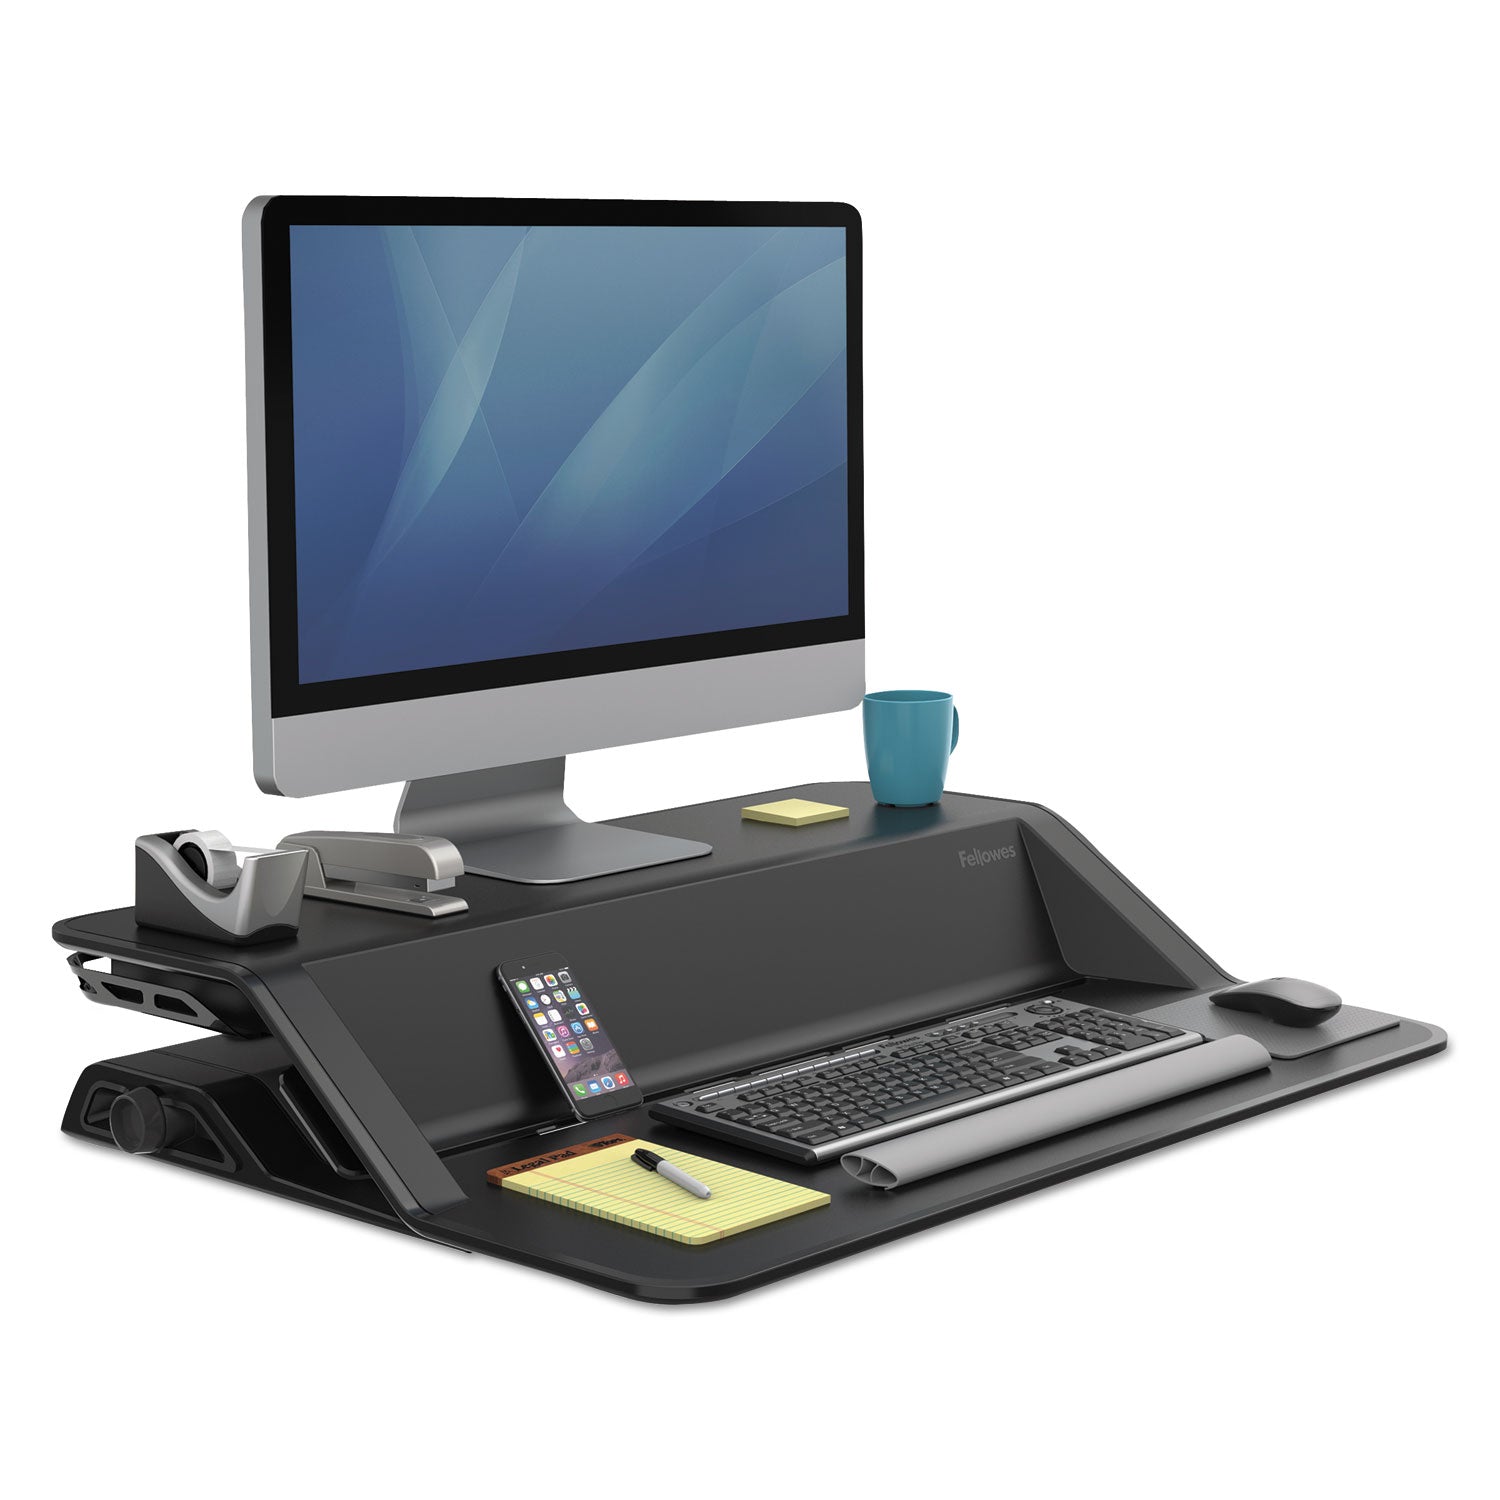 Lotus Sit-Stands Workstation, 32.75" x 24.25" x 5.5" to 22.5", Black - 4